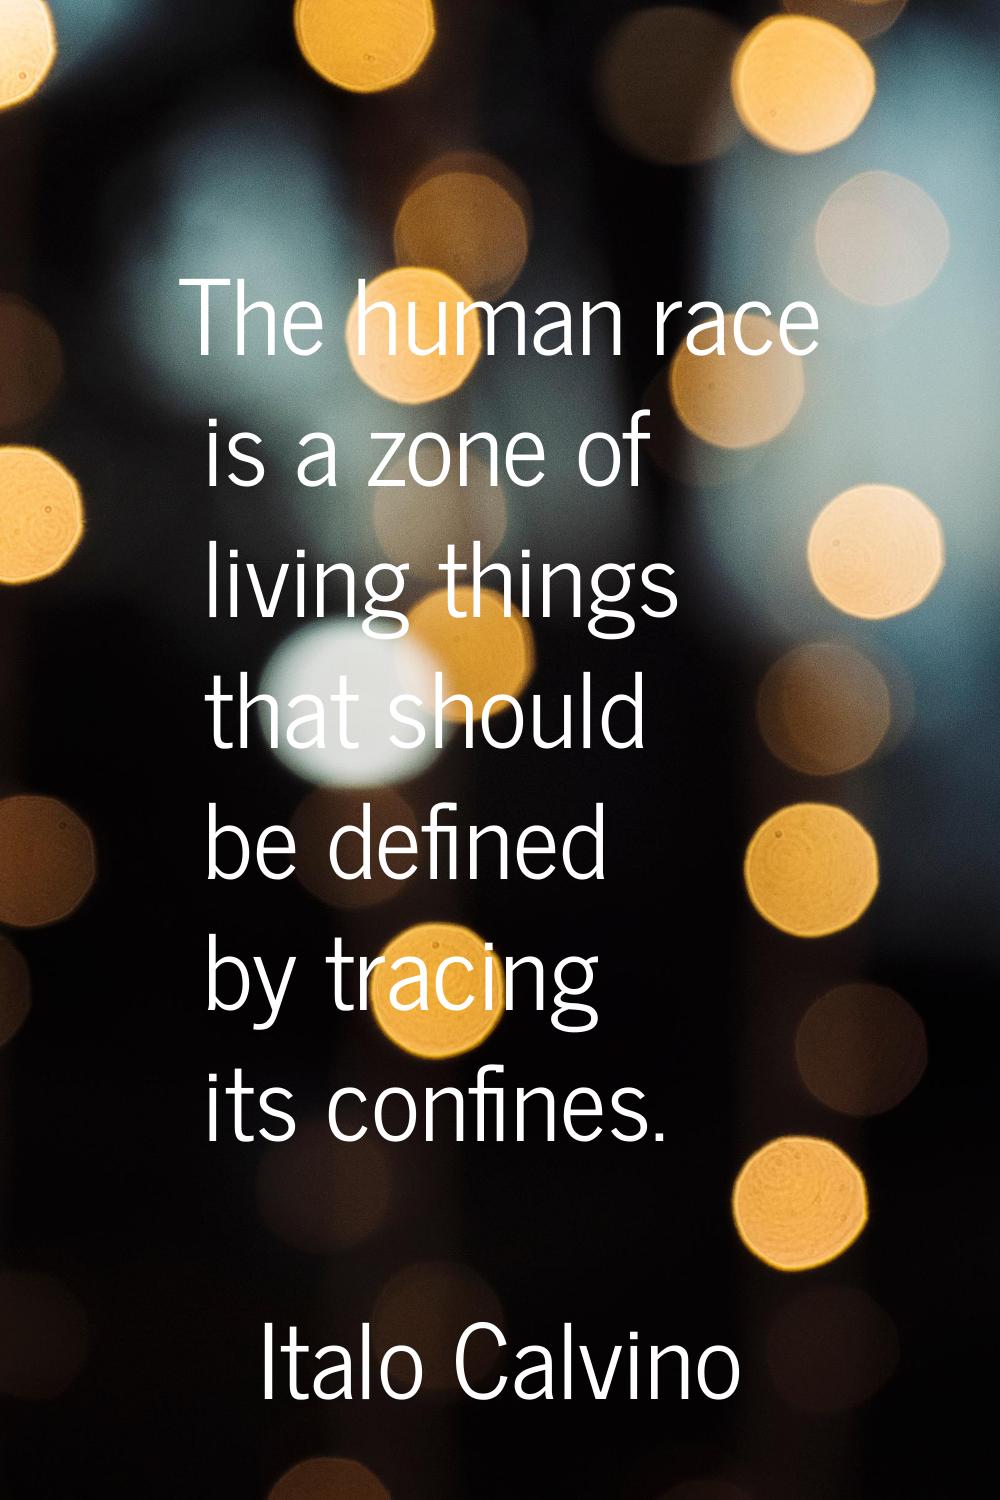 The human race is a zone of living things that should be defined by tracing its confines.